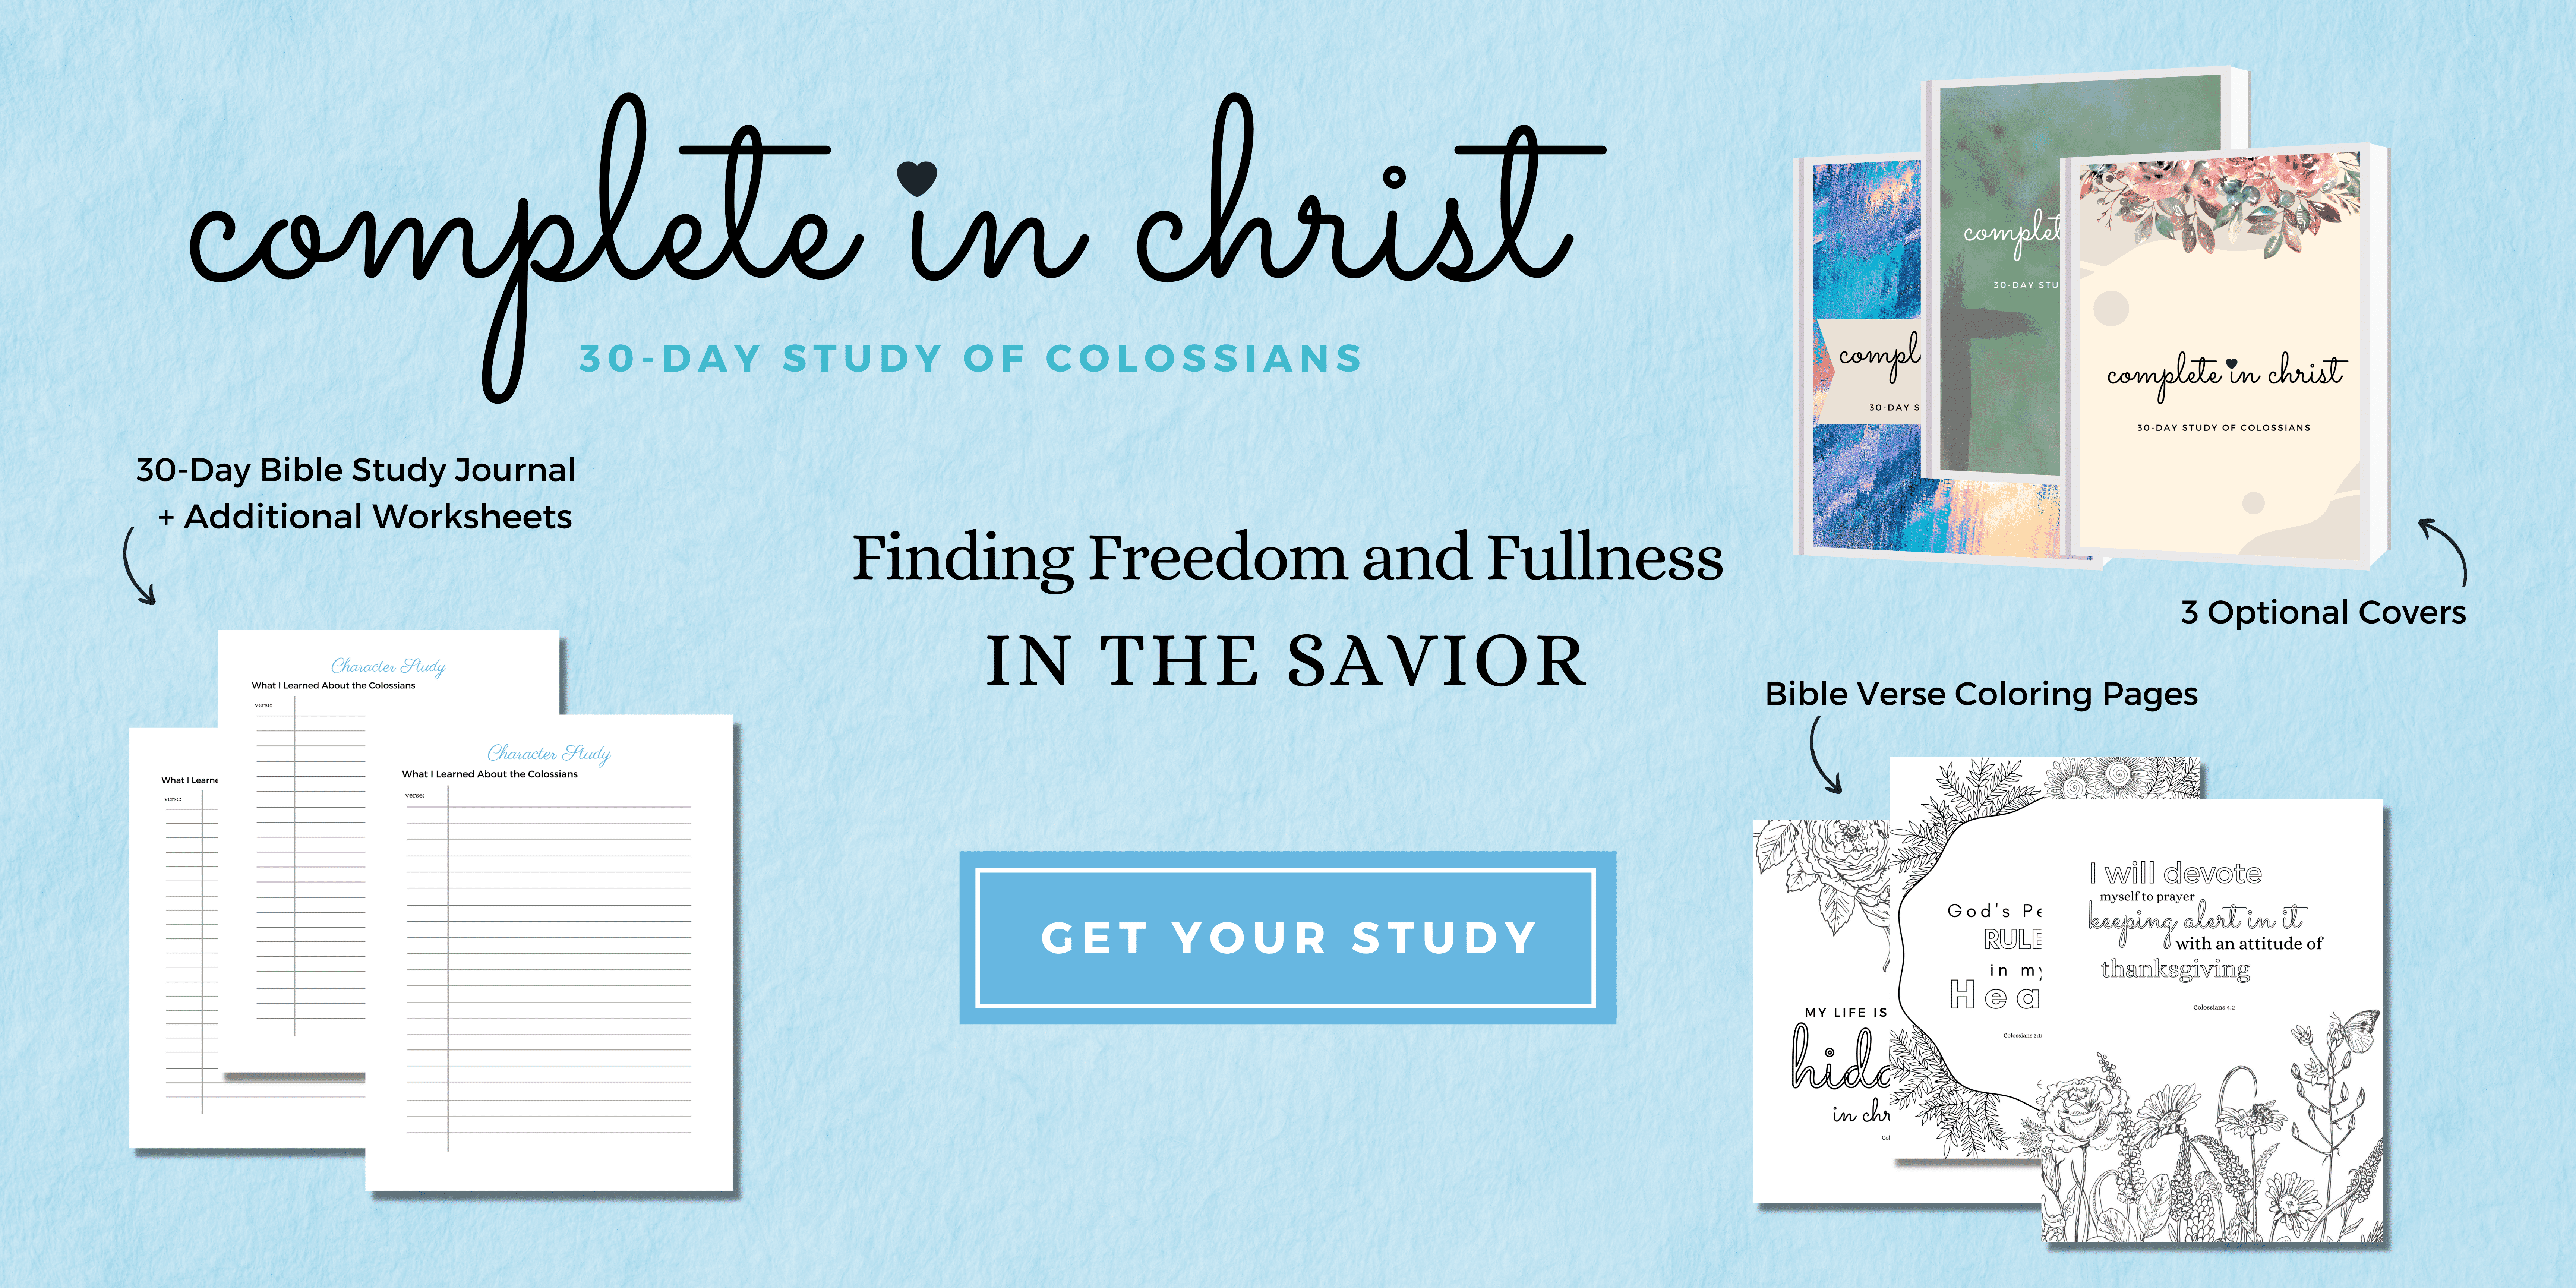 guided bible studies - complete in christ